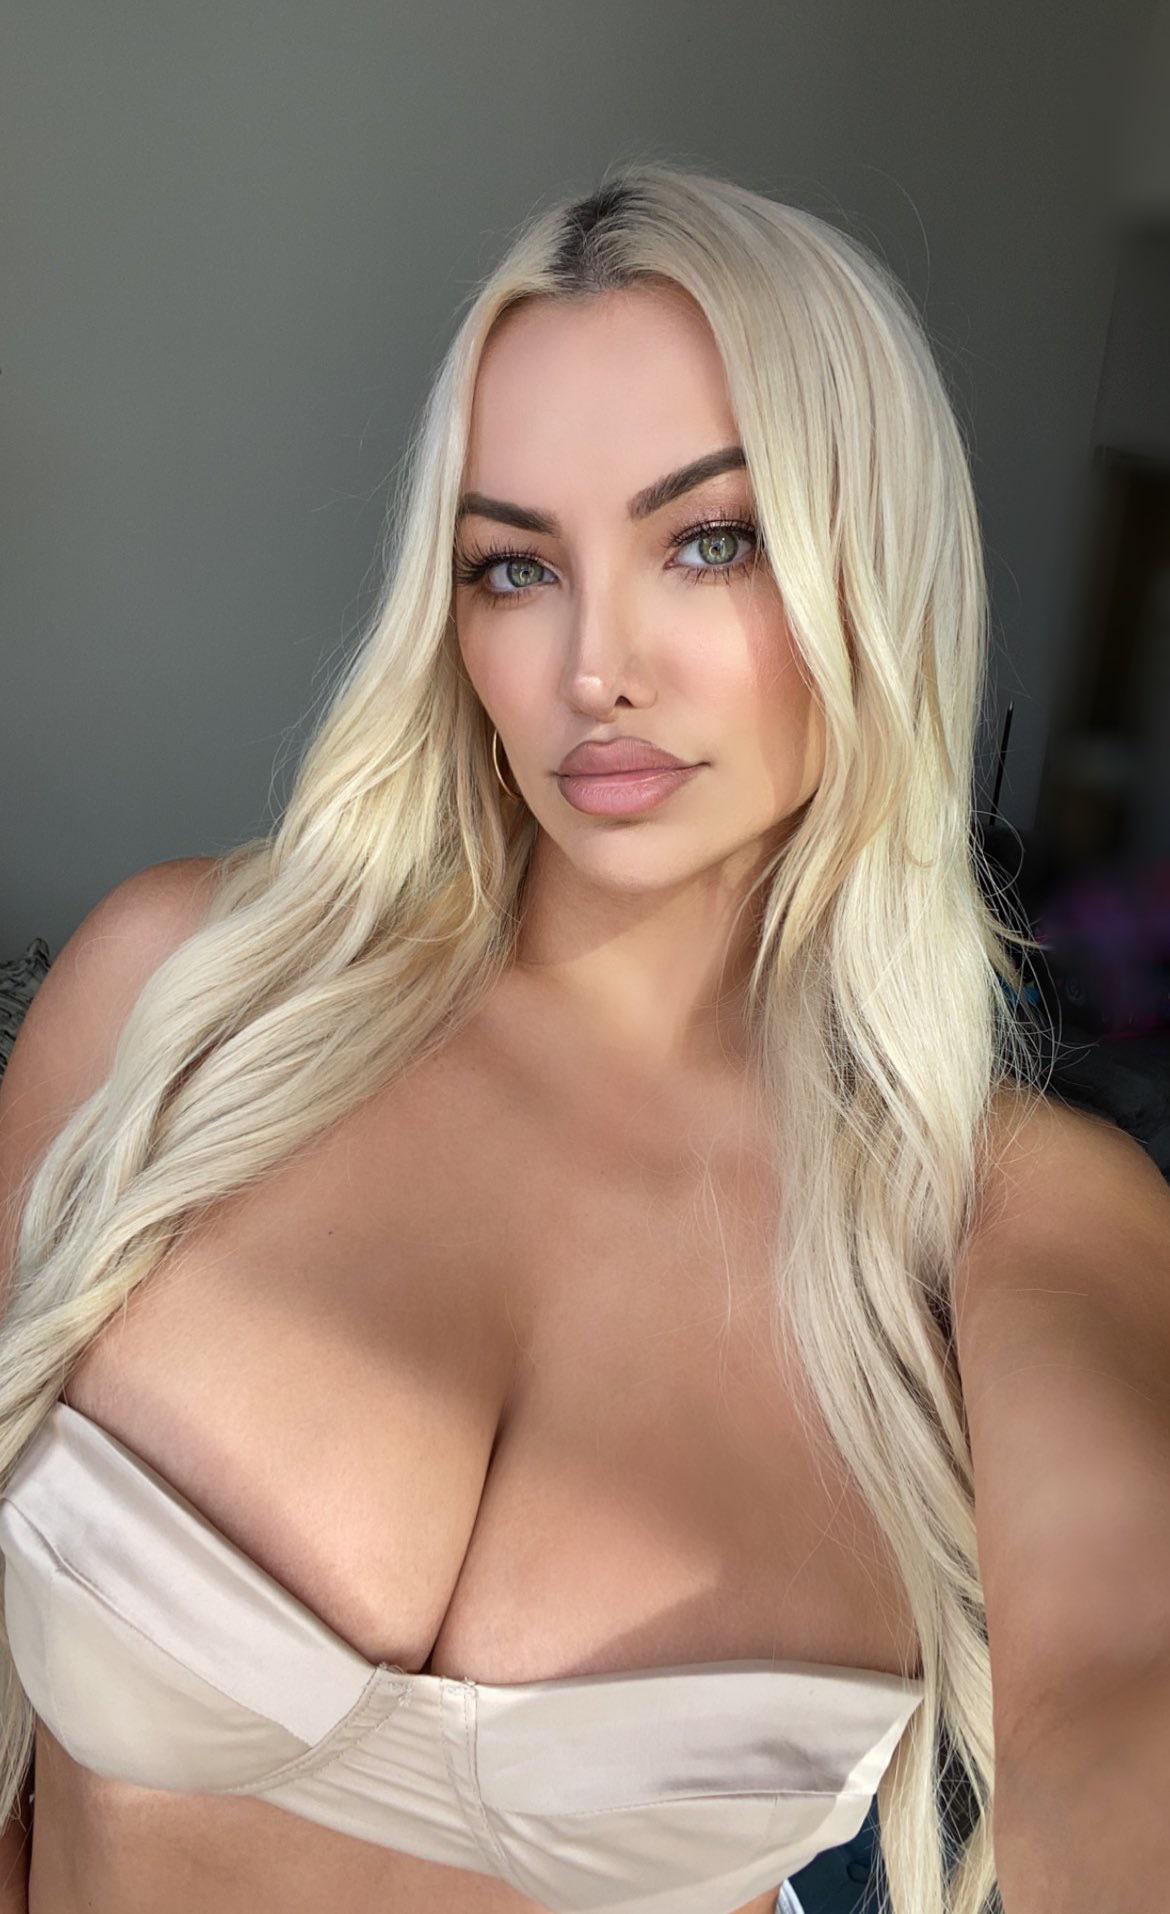 I understand why my dad is lusting for 😘 from Lindsey Pelas so much